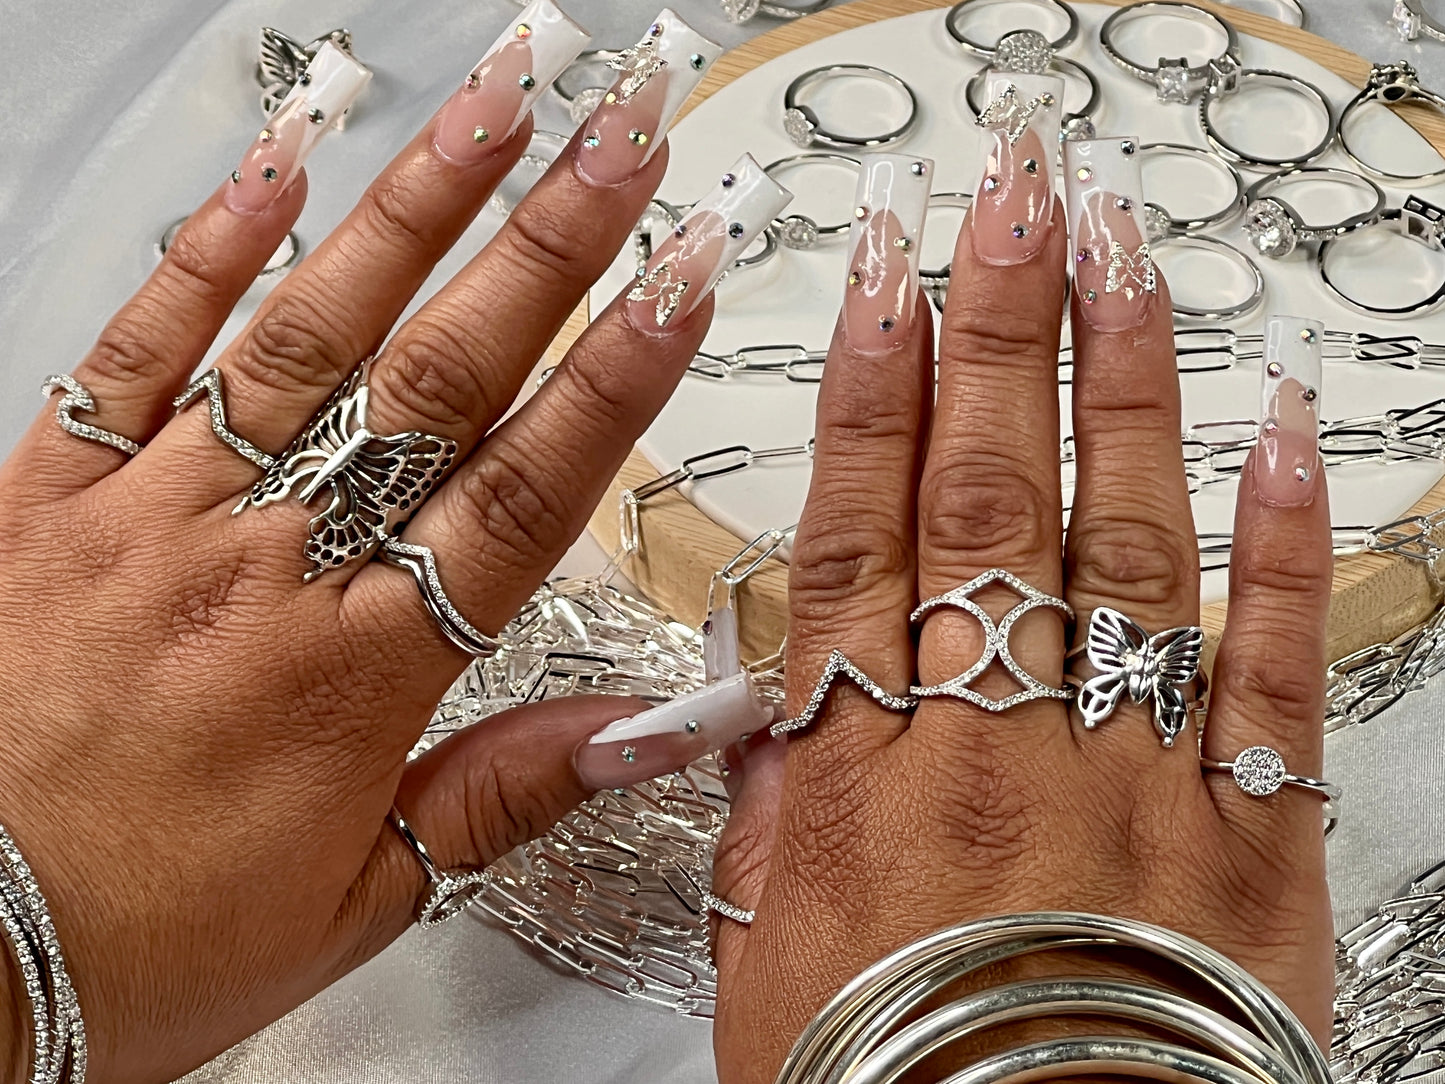 A woman's hands adorned with the Statement Butterfly Ring and bangles.